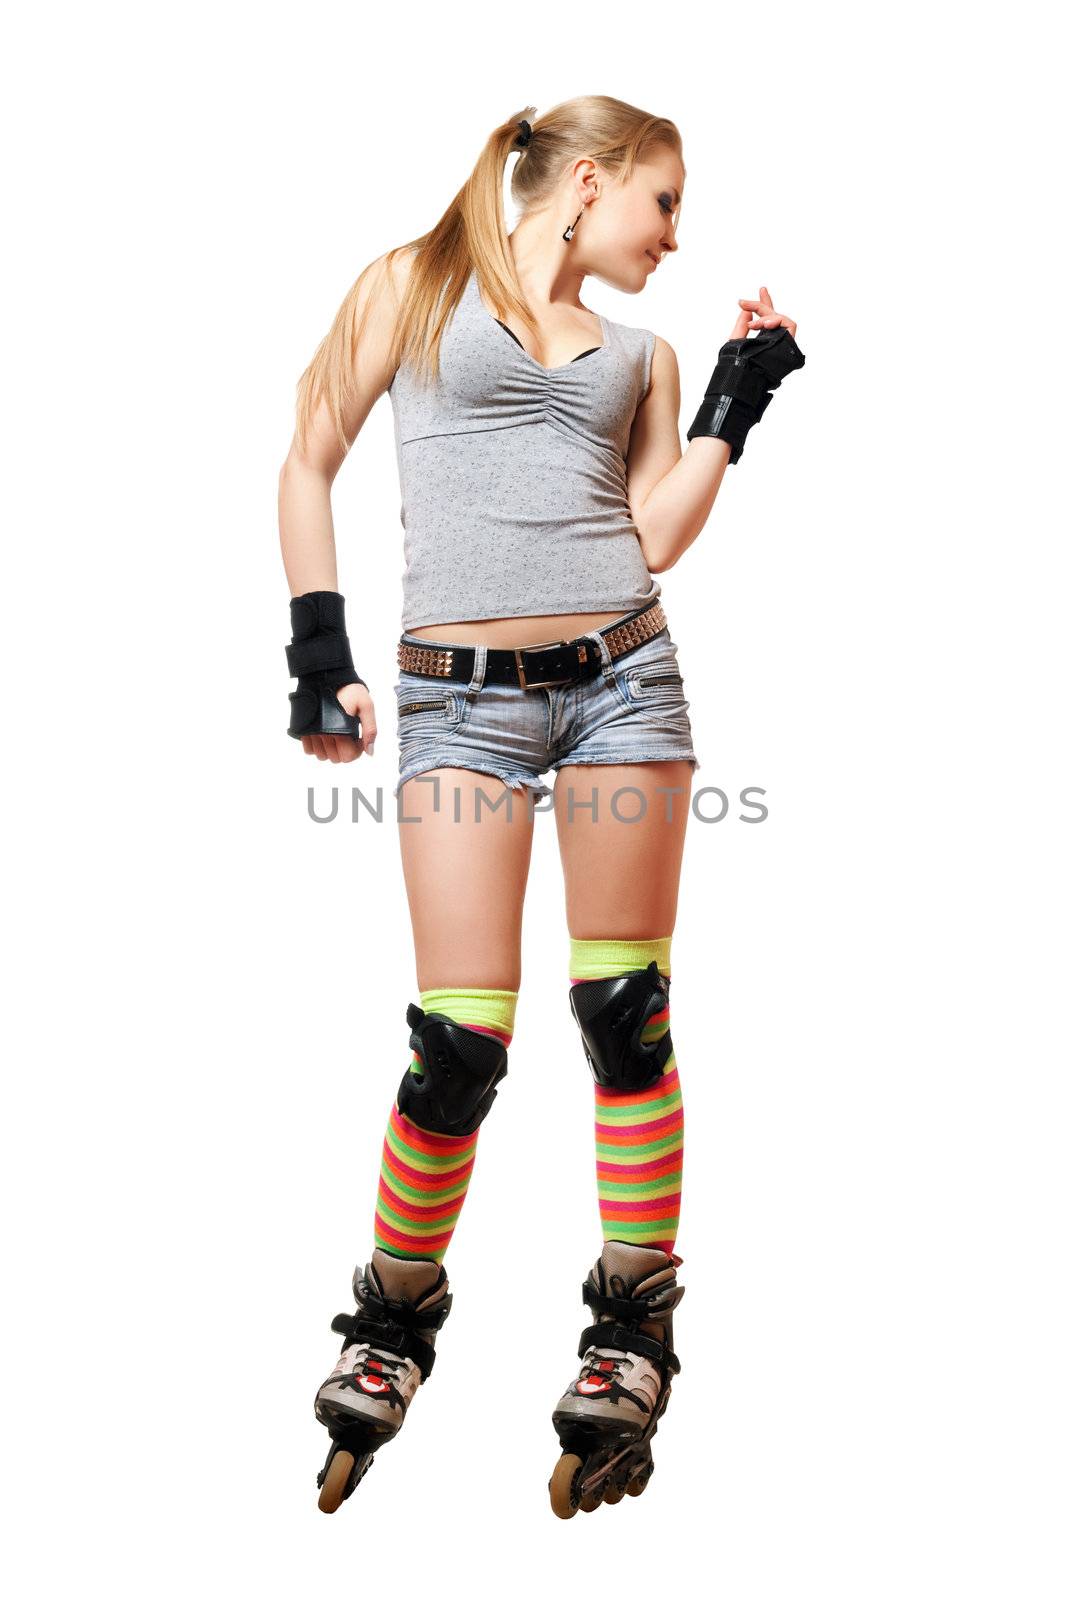 Playful beautiful young blonde on roller skates